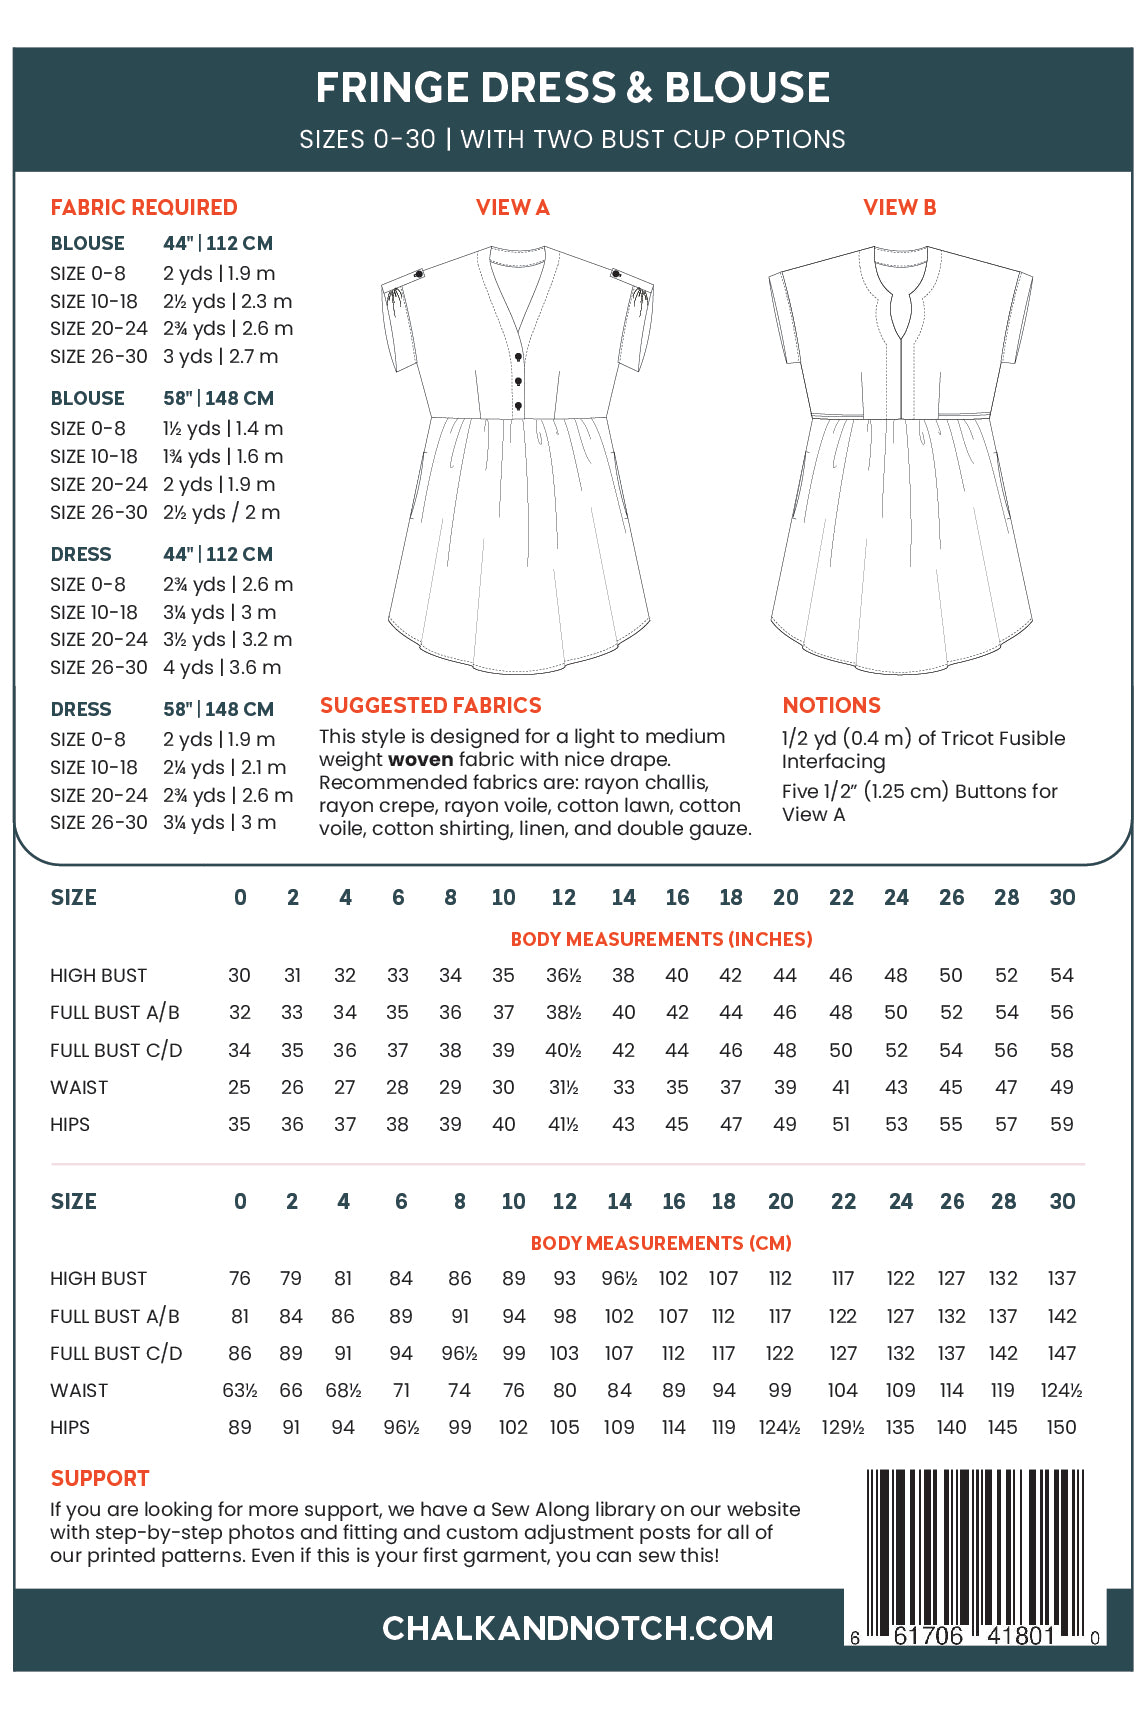 Fringe Dress and Blouse | Chalk and Notch Patterns - MaaiDesign